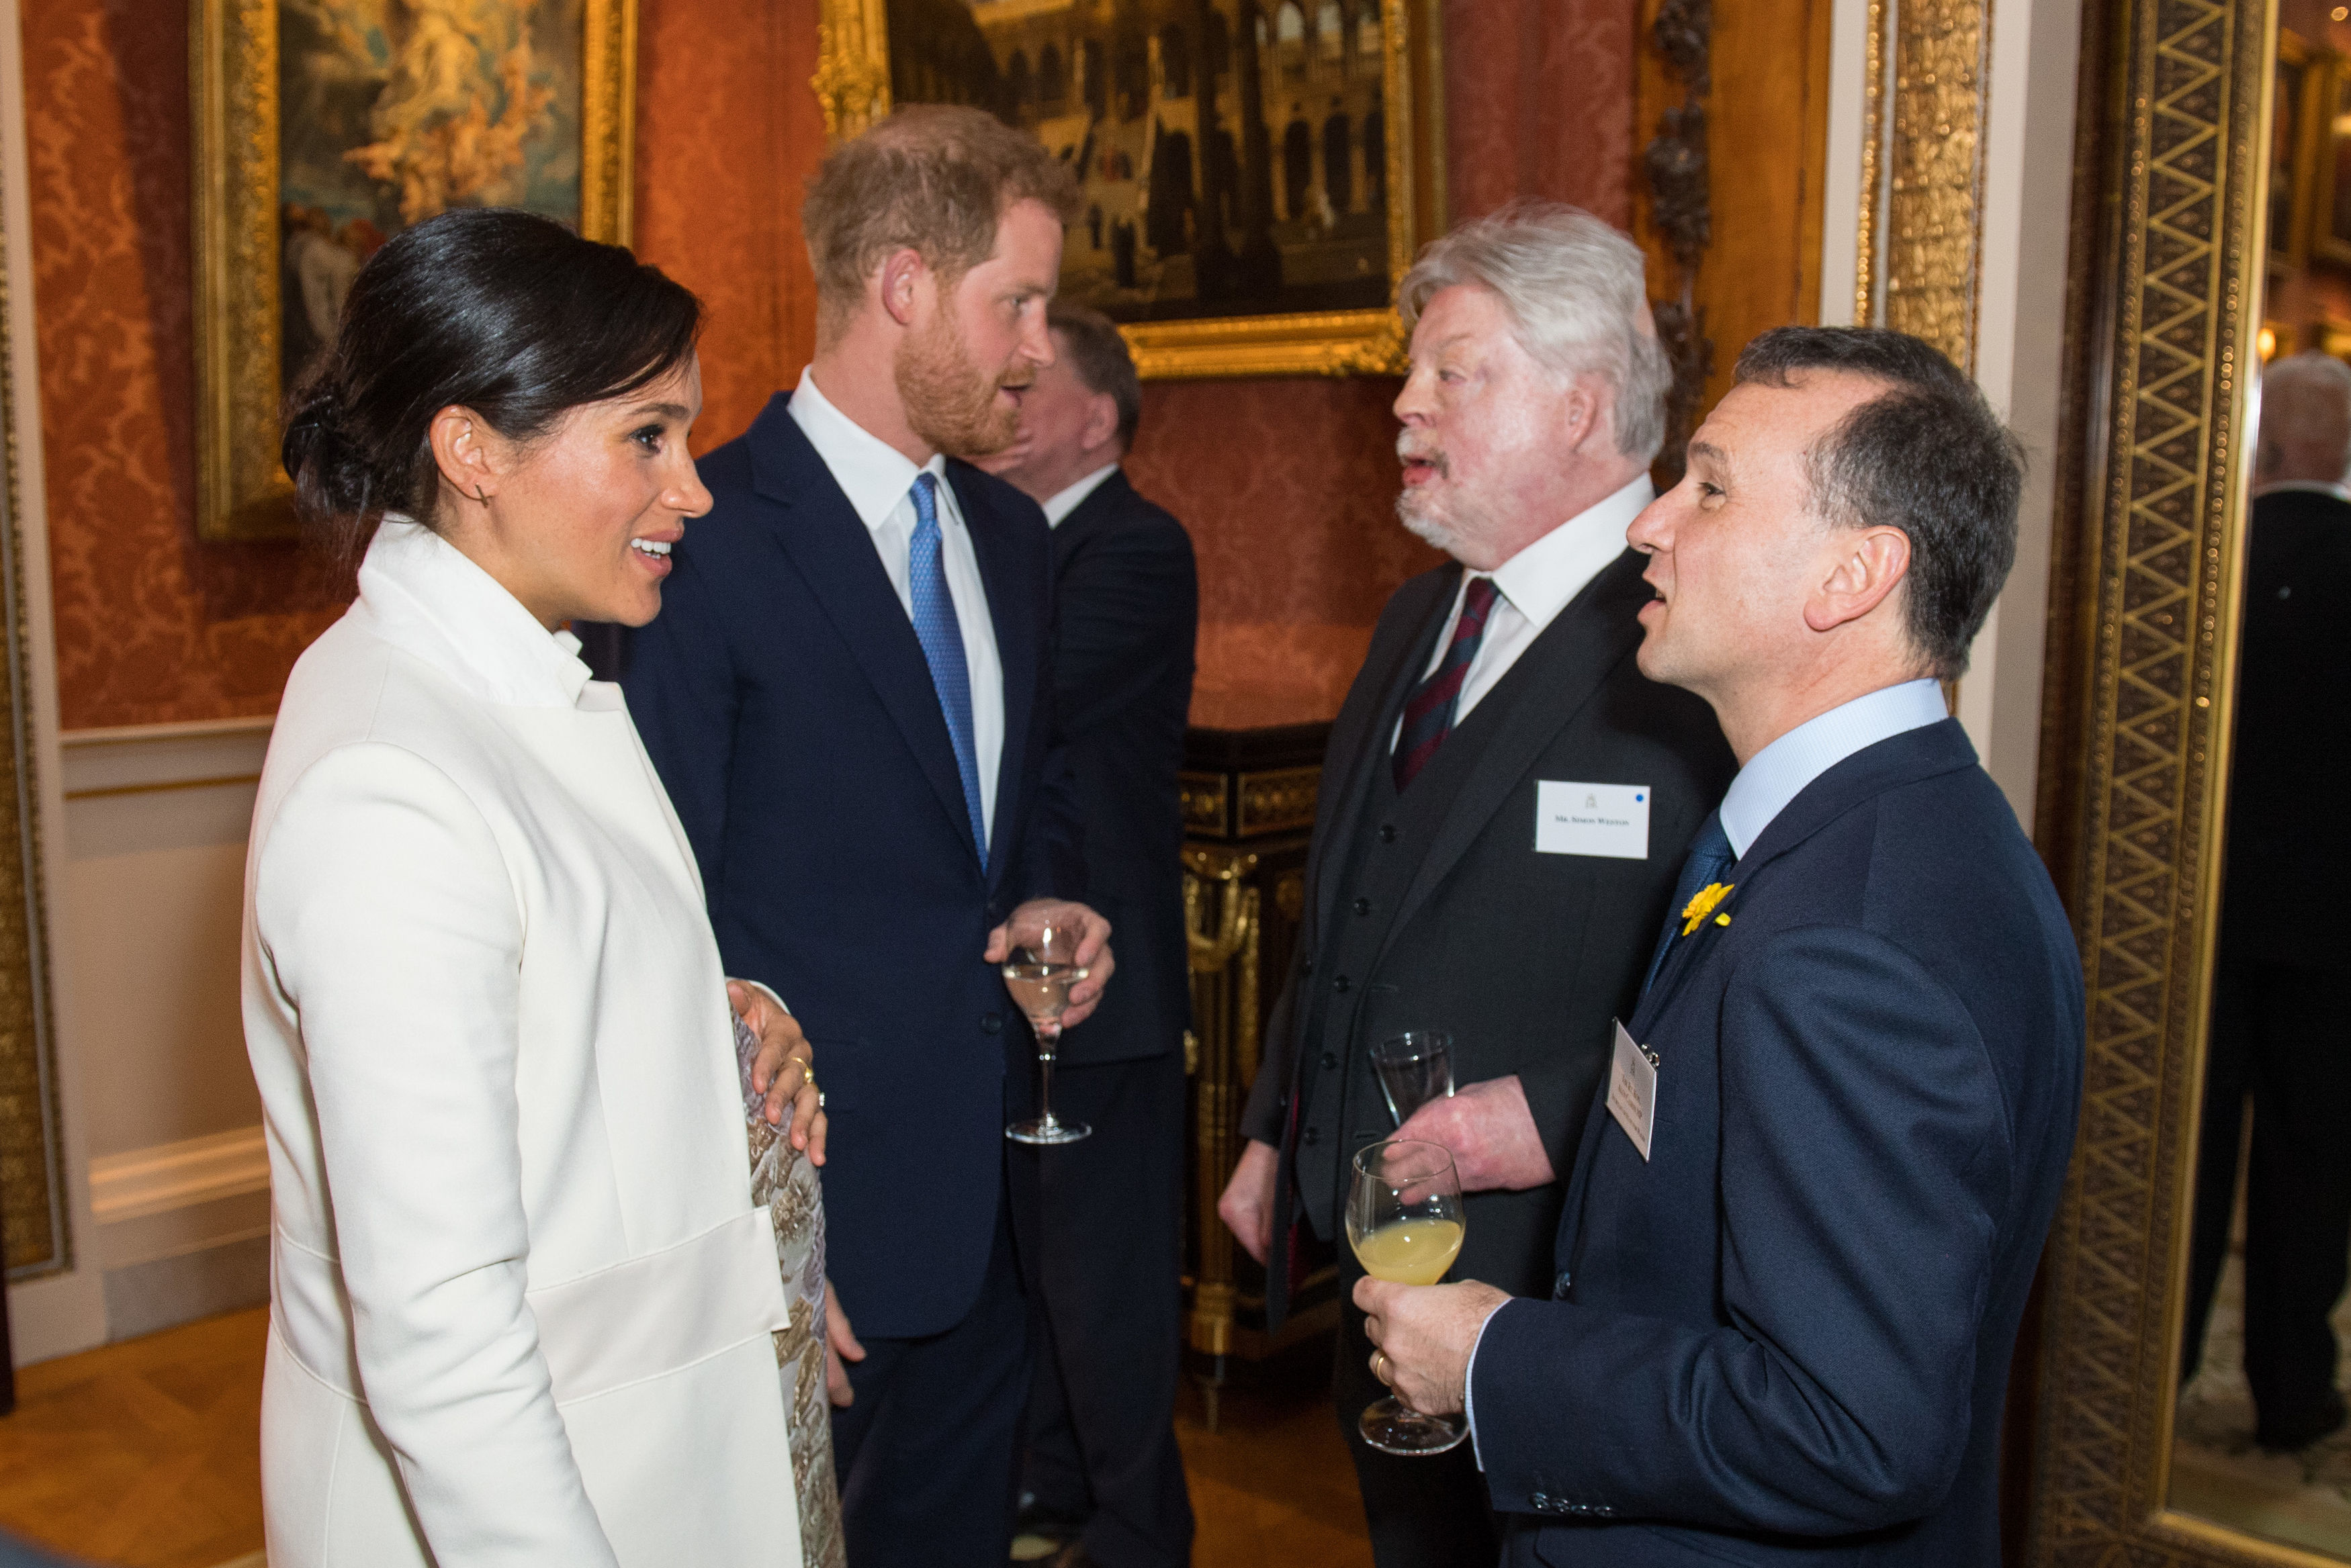 The Duke and Duchess of Sussex meet Simon Weston and Welsh Secretary Alun Cairn